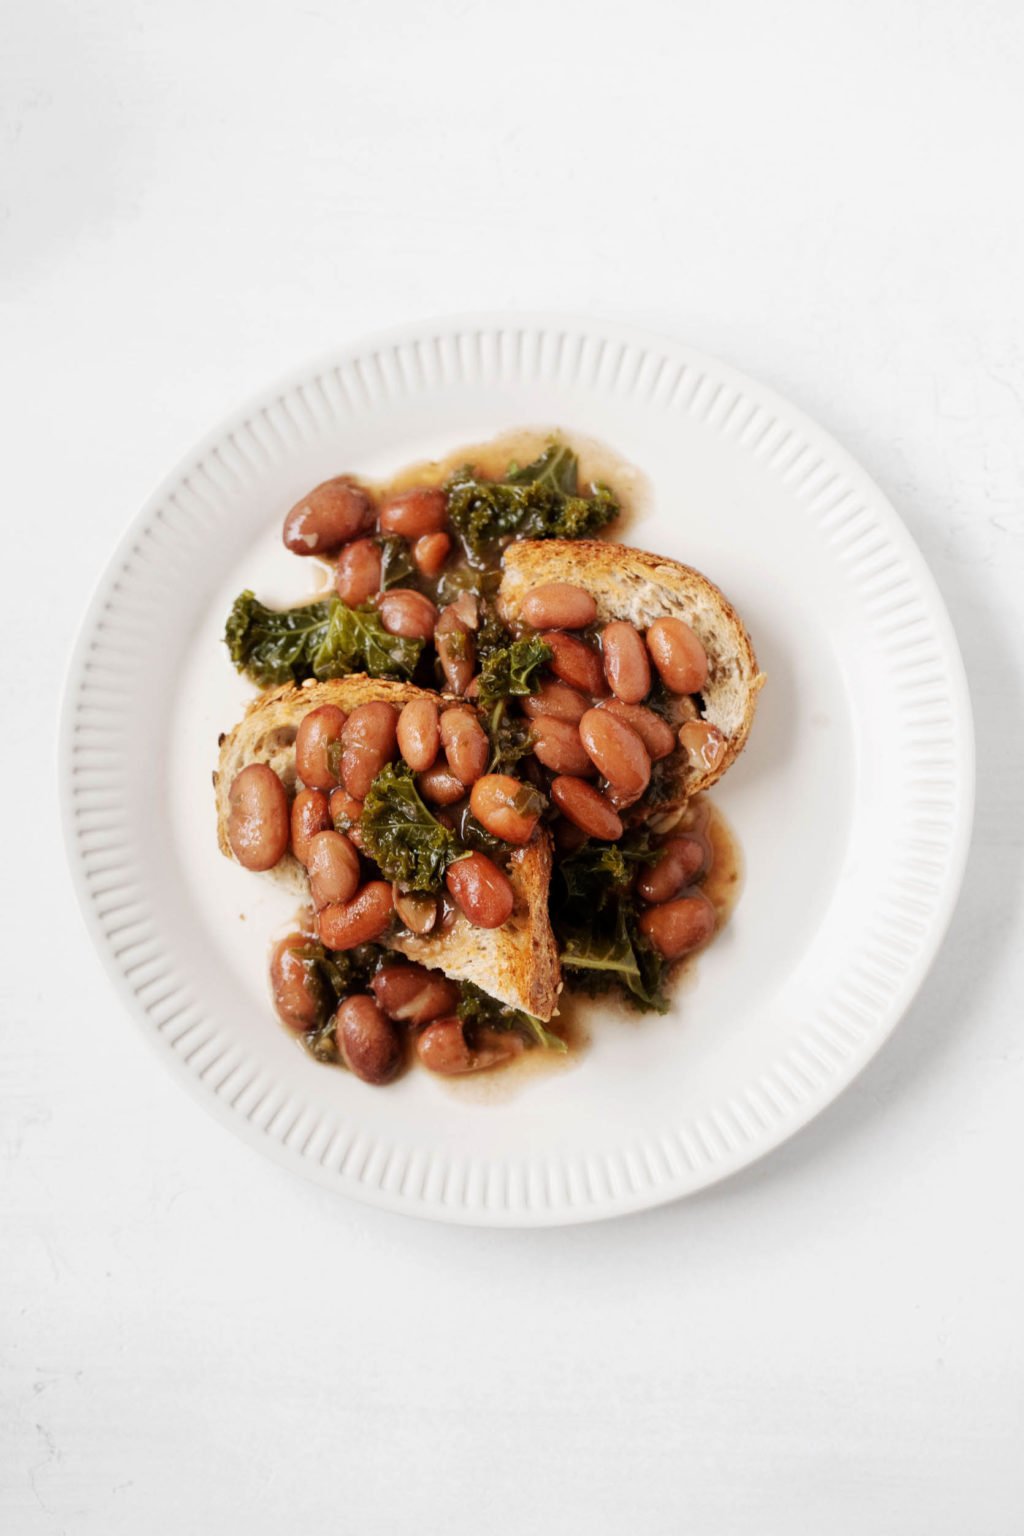 A white, fluted plate holds two slices of toast, cooked leafy greens, and a plant-based protein.